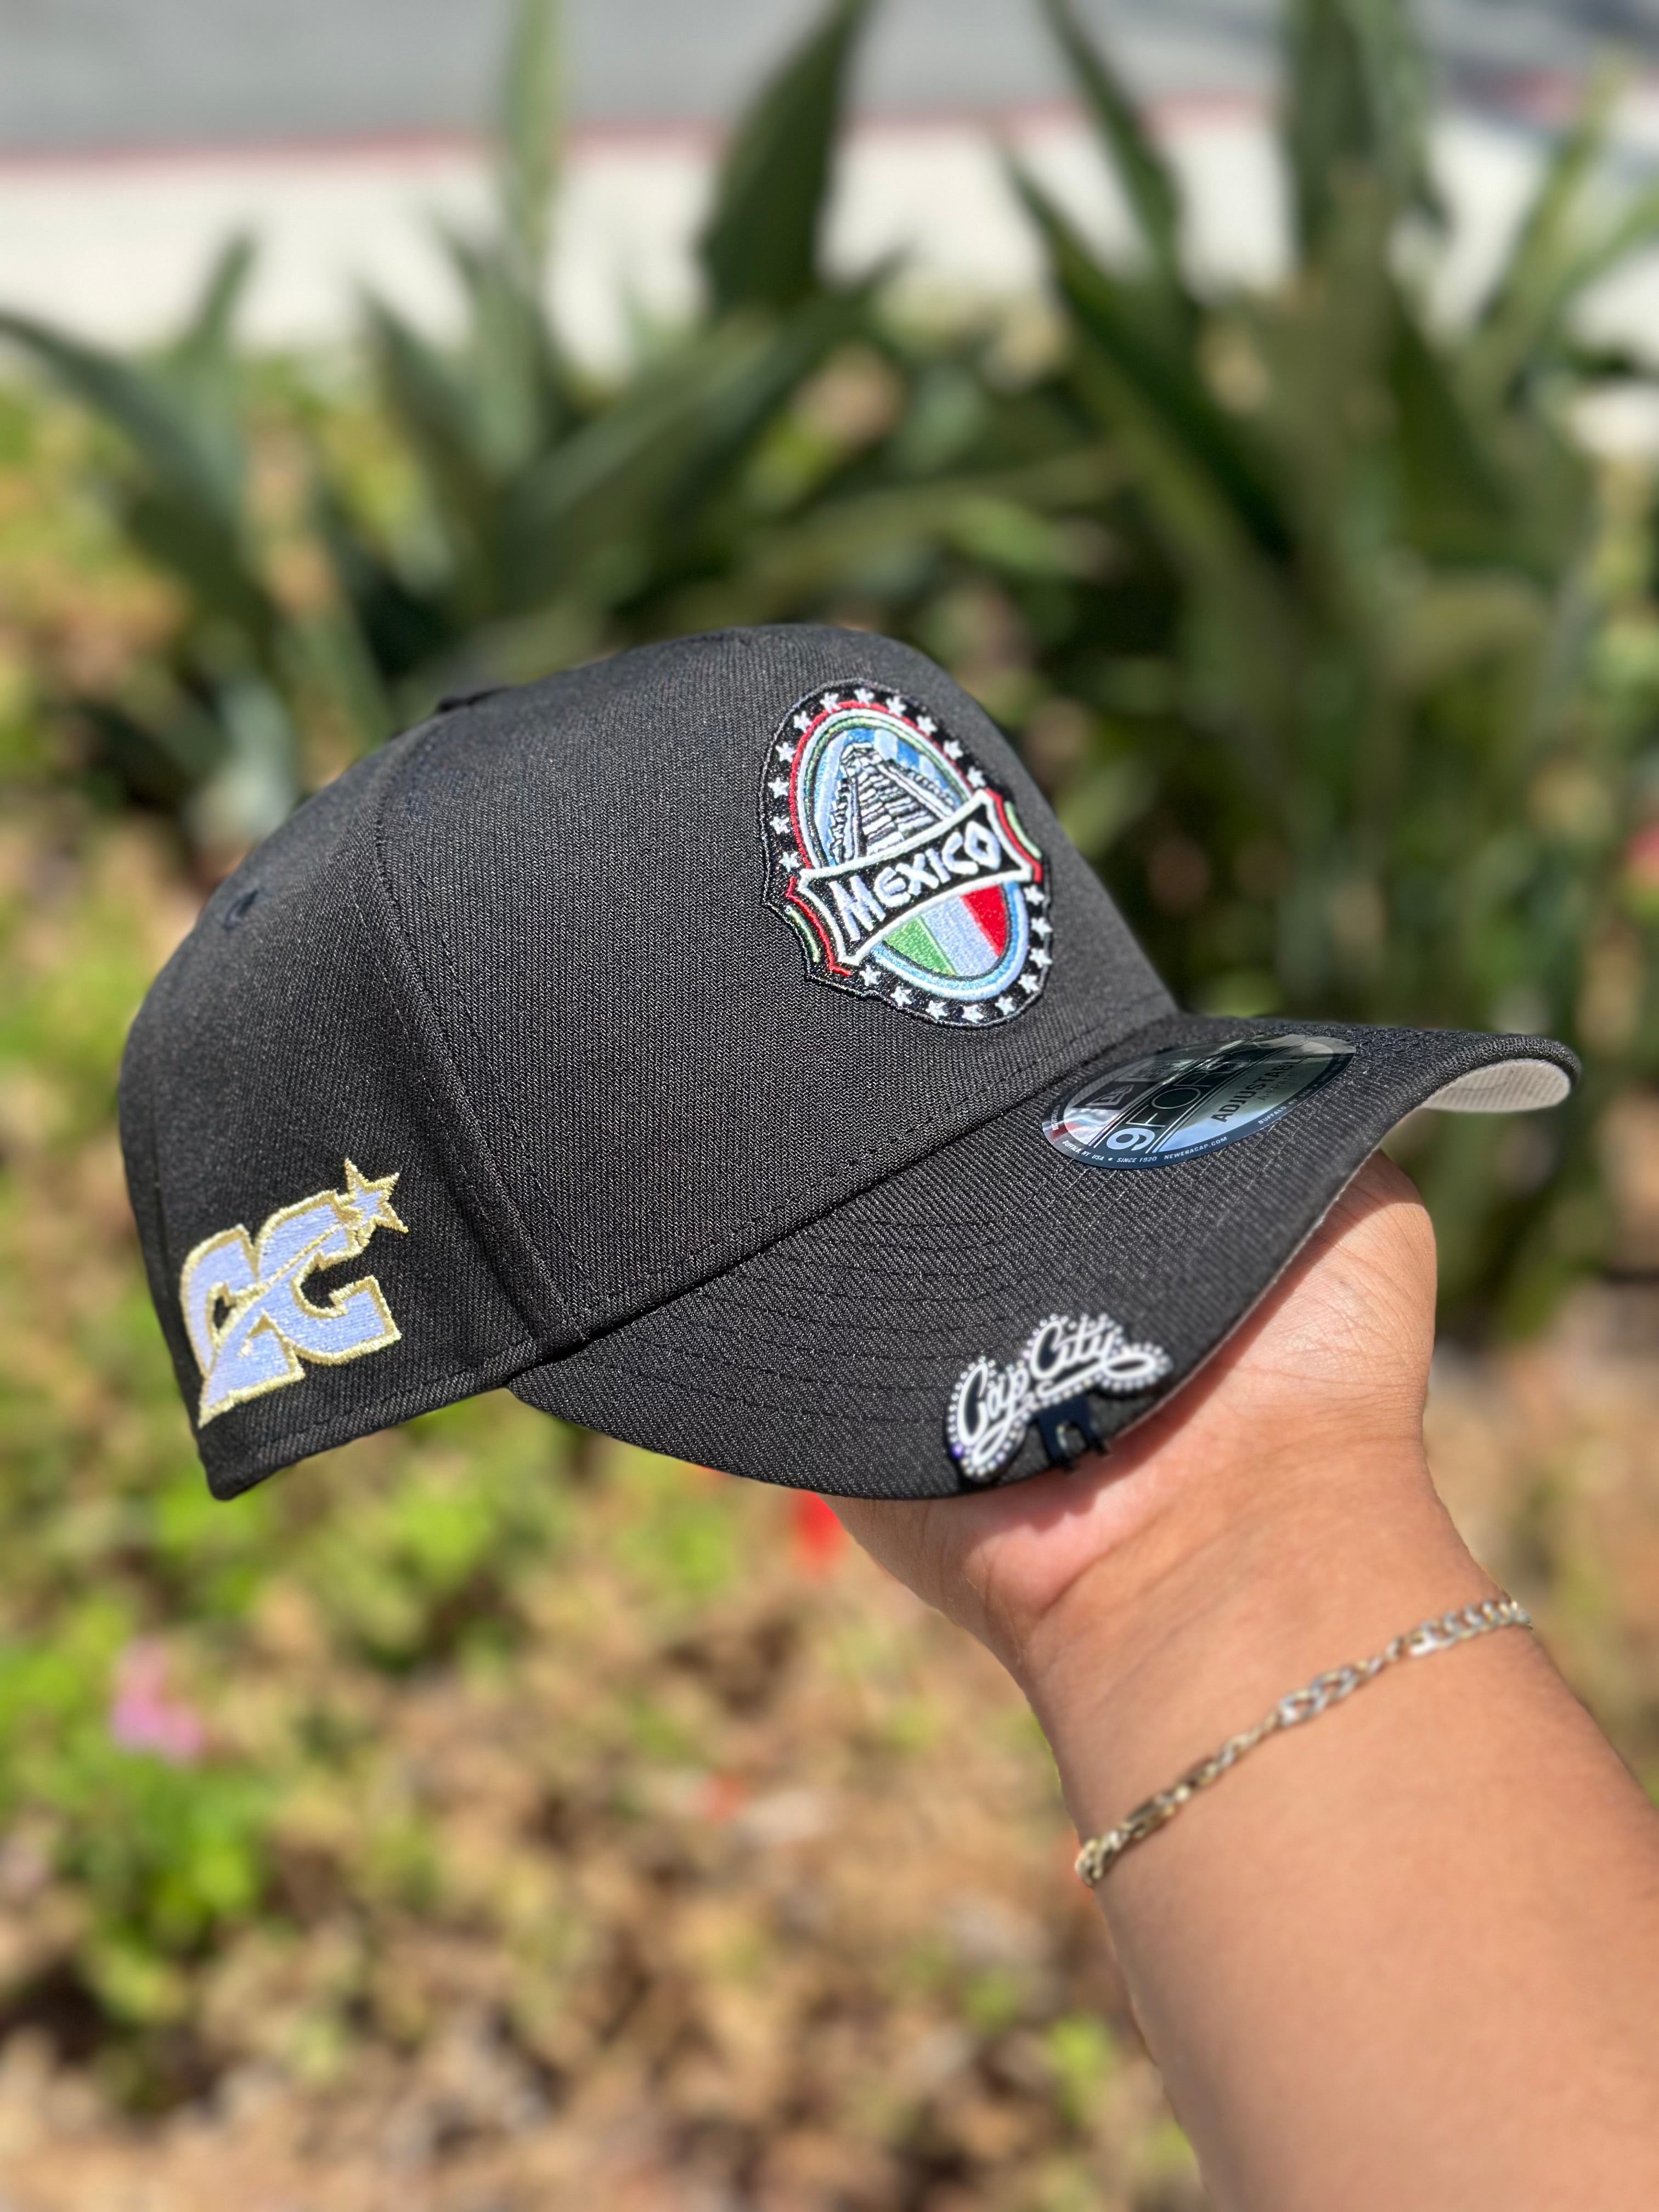 NEW ERA EXCLUSIVE 9FORTY BLACK MEXICO A-FRAME ADJUSTABLE W/ "CAP CITY" LOGO SIDE PATCH